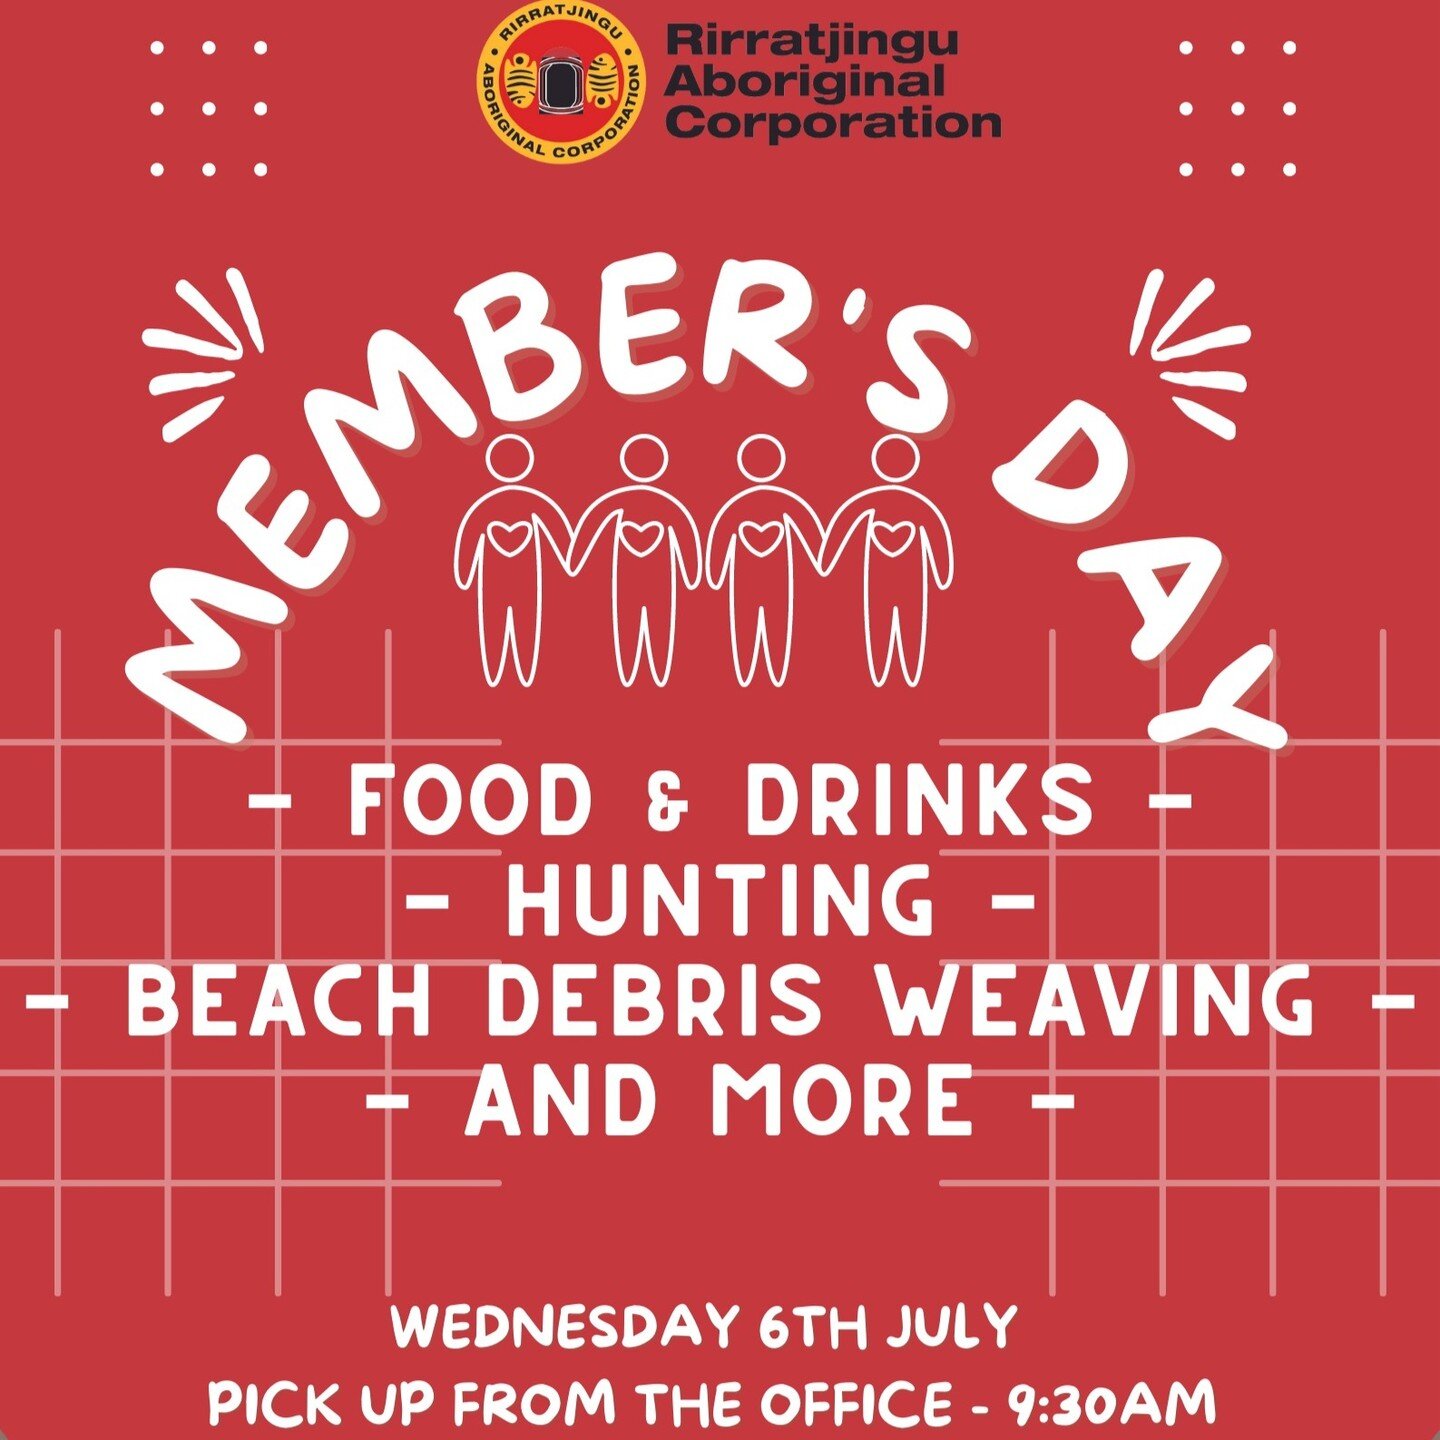 A reminder to all our members... Members Day is on tomorrow!